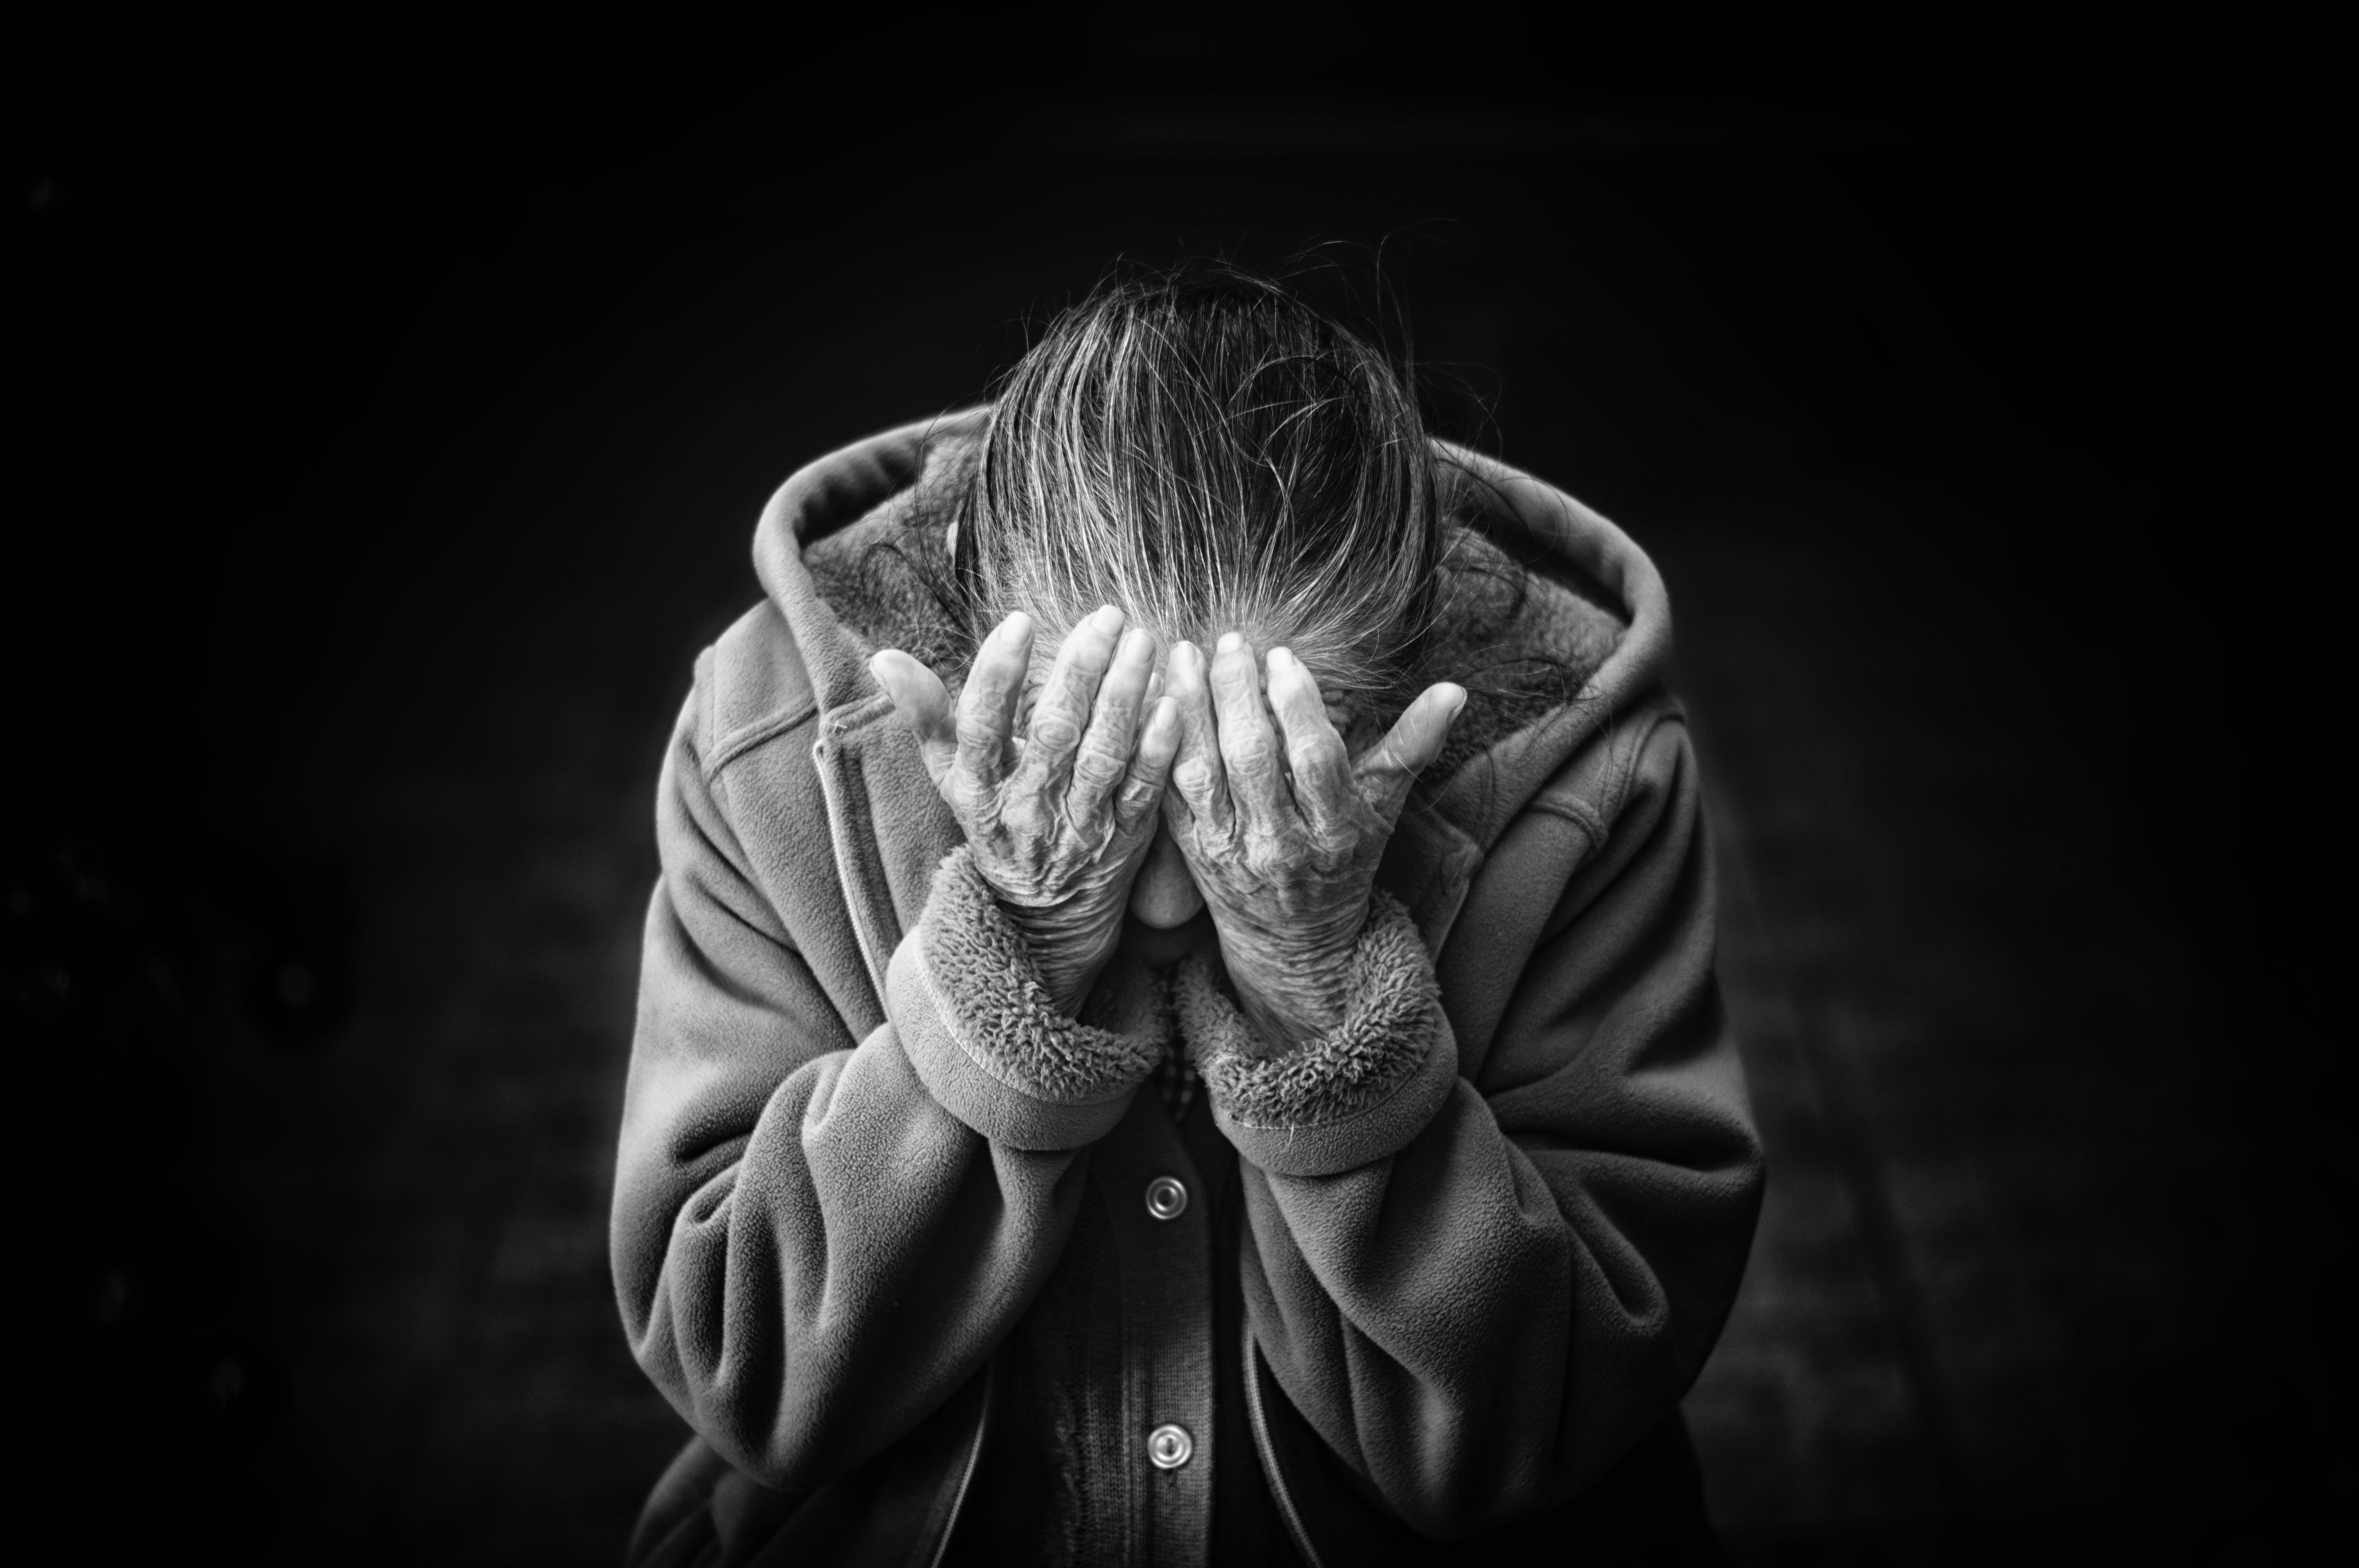 Elderly woman covering her face; image by Cristian Newman, via Unsplash.com.